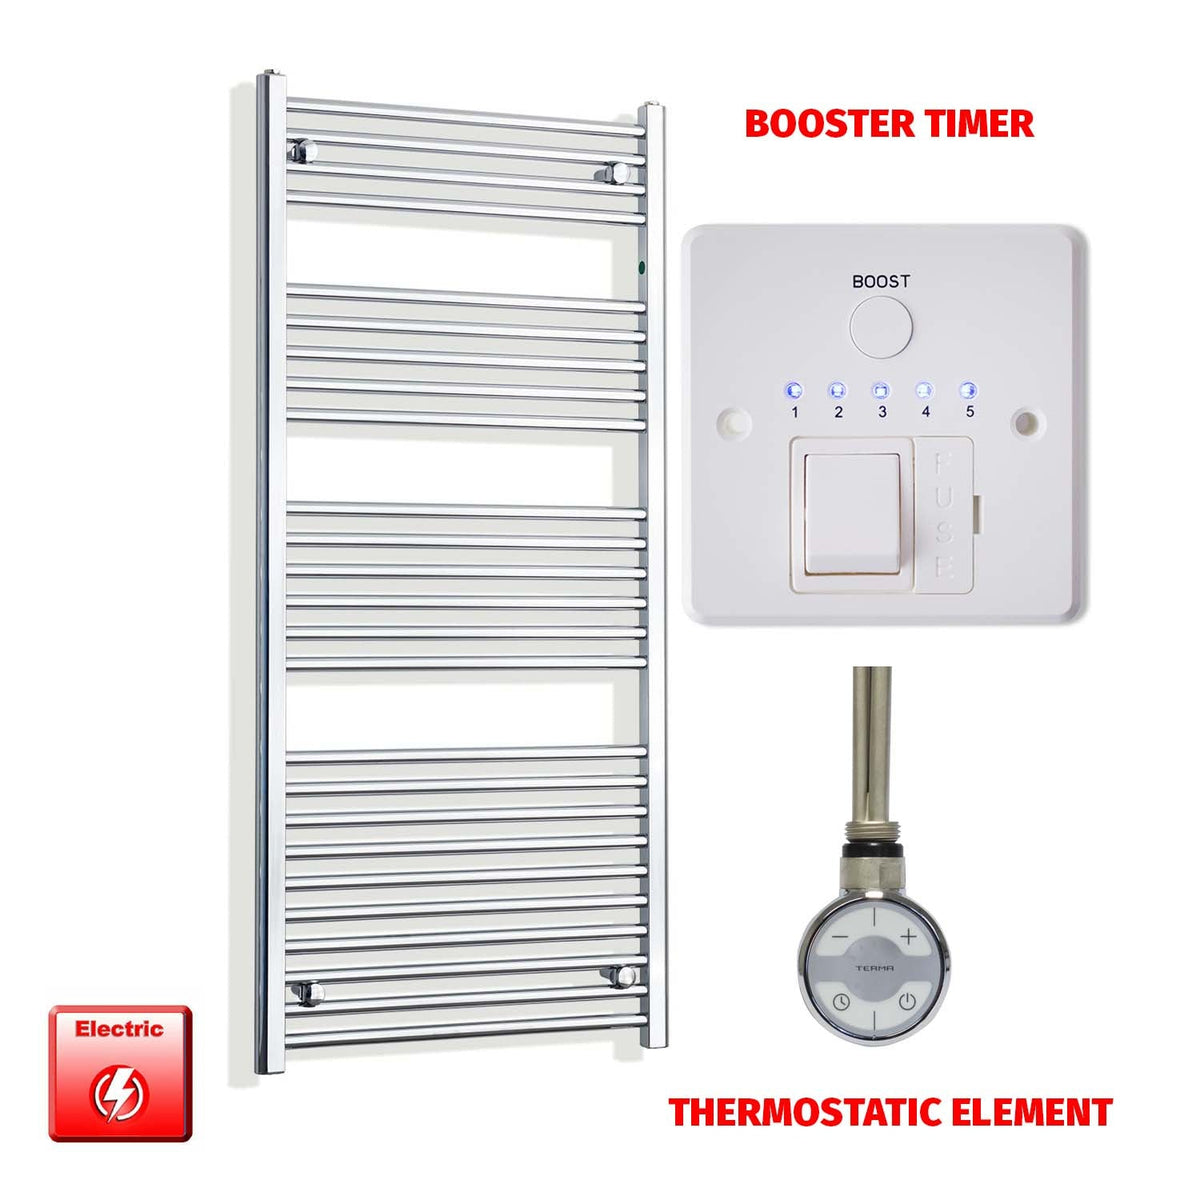 1400mm High 550mm Wide Pre-Filled Electric Heated Towel Radiator Straight Chrome MOA Thermostatic element Booster timer